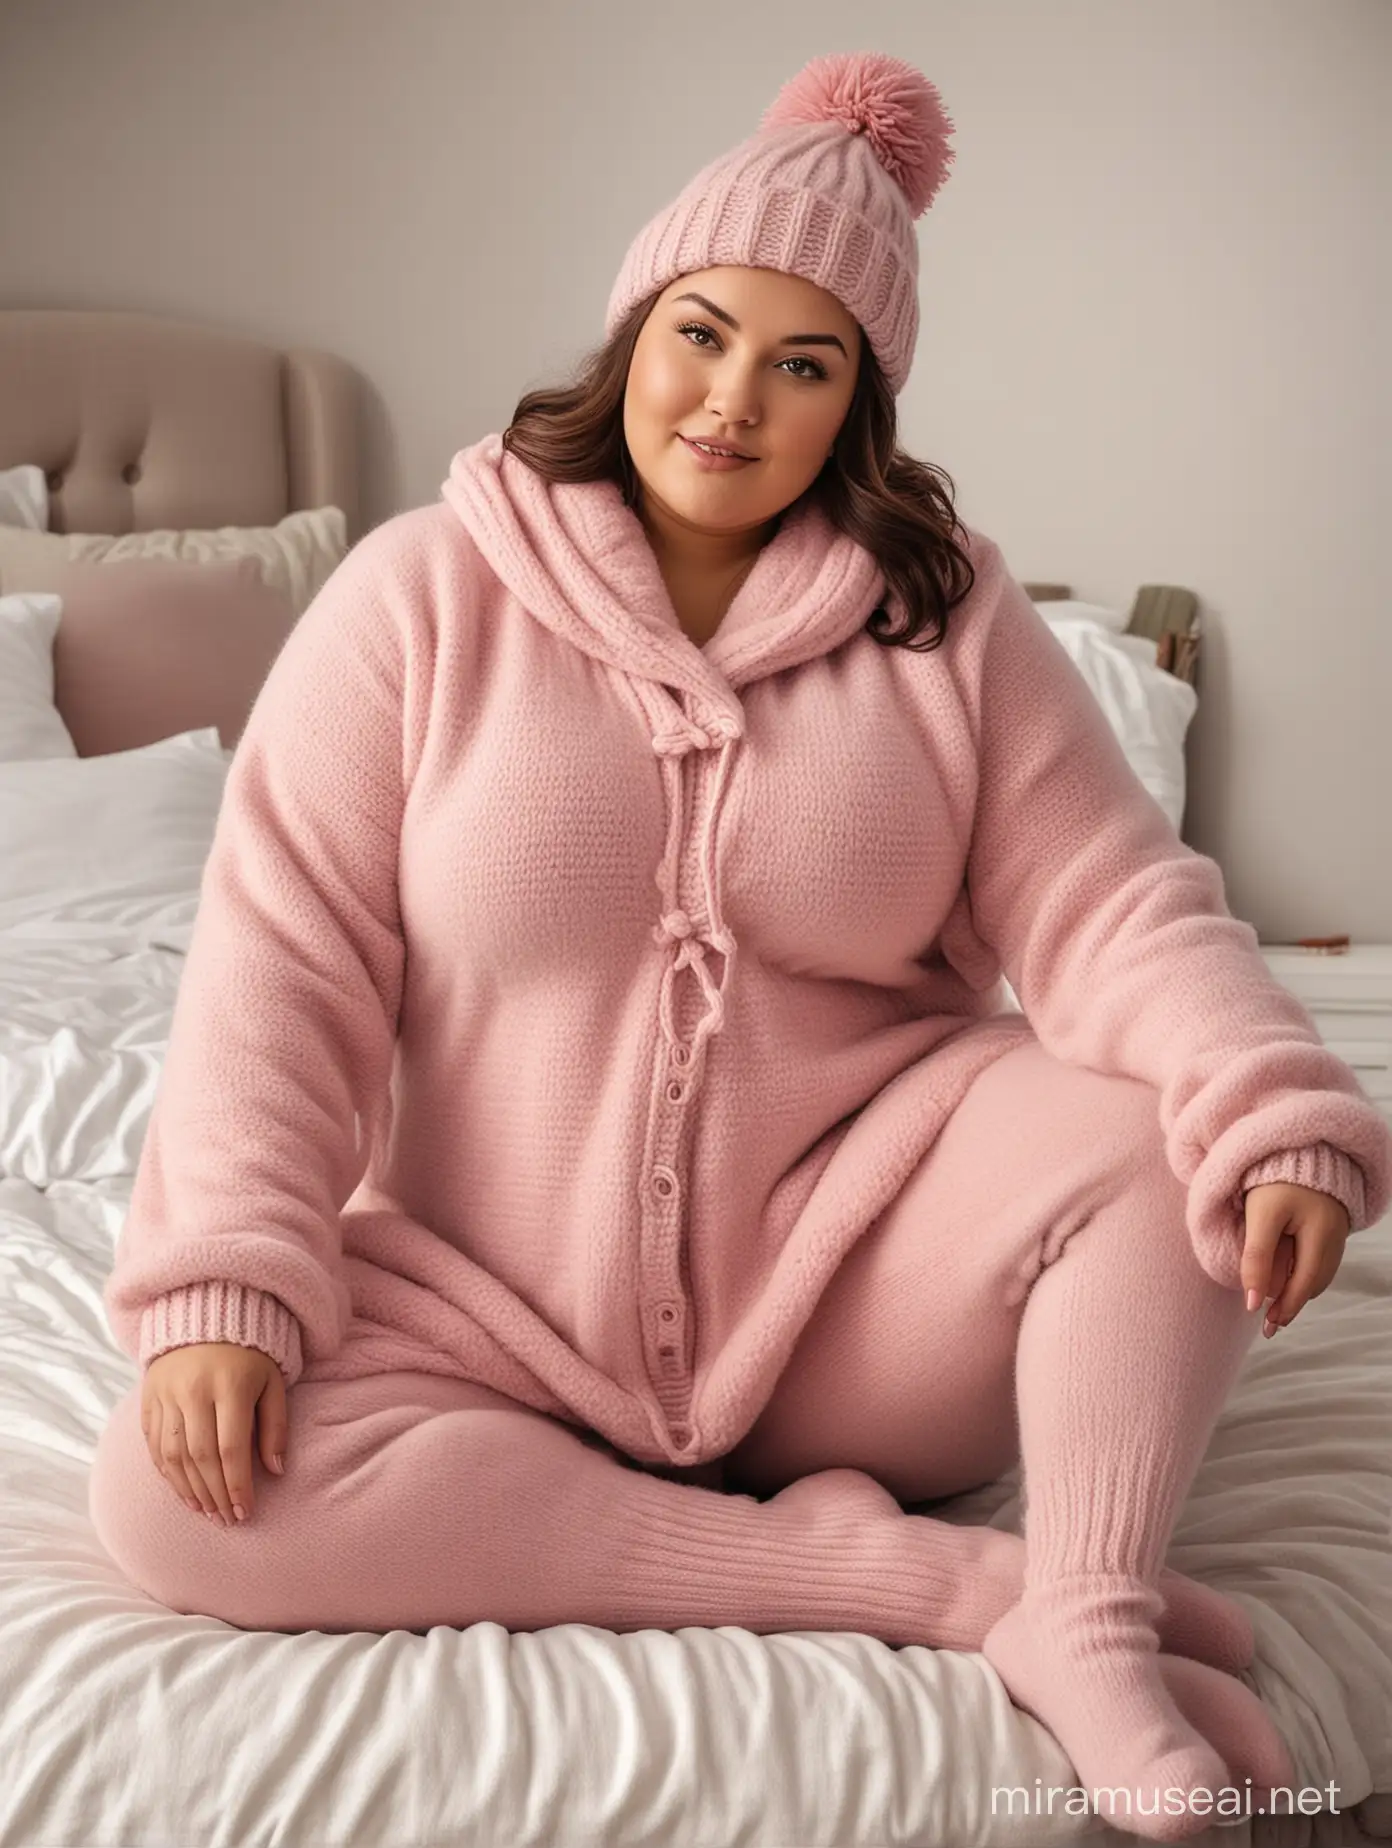 Cozy PlusSize Woman in Layers of Warm Mohair Wool Clothing Relaxing on Bed